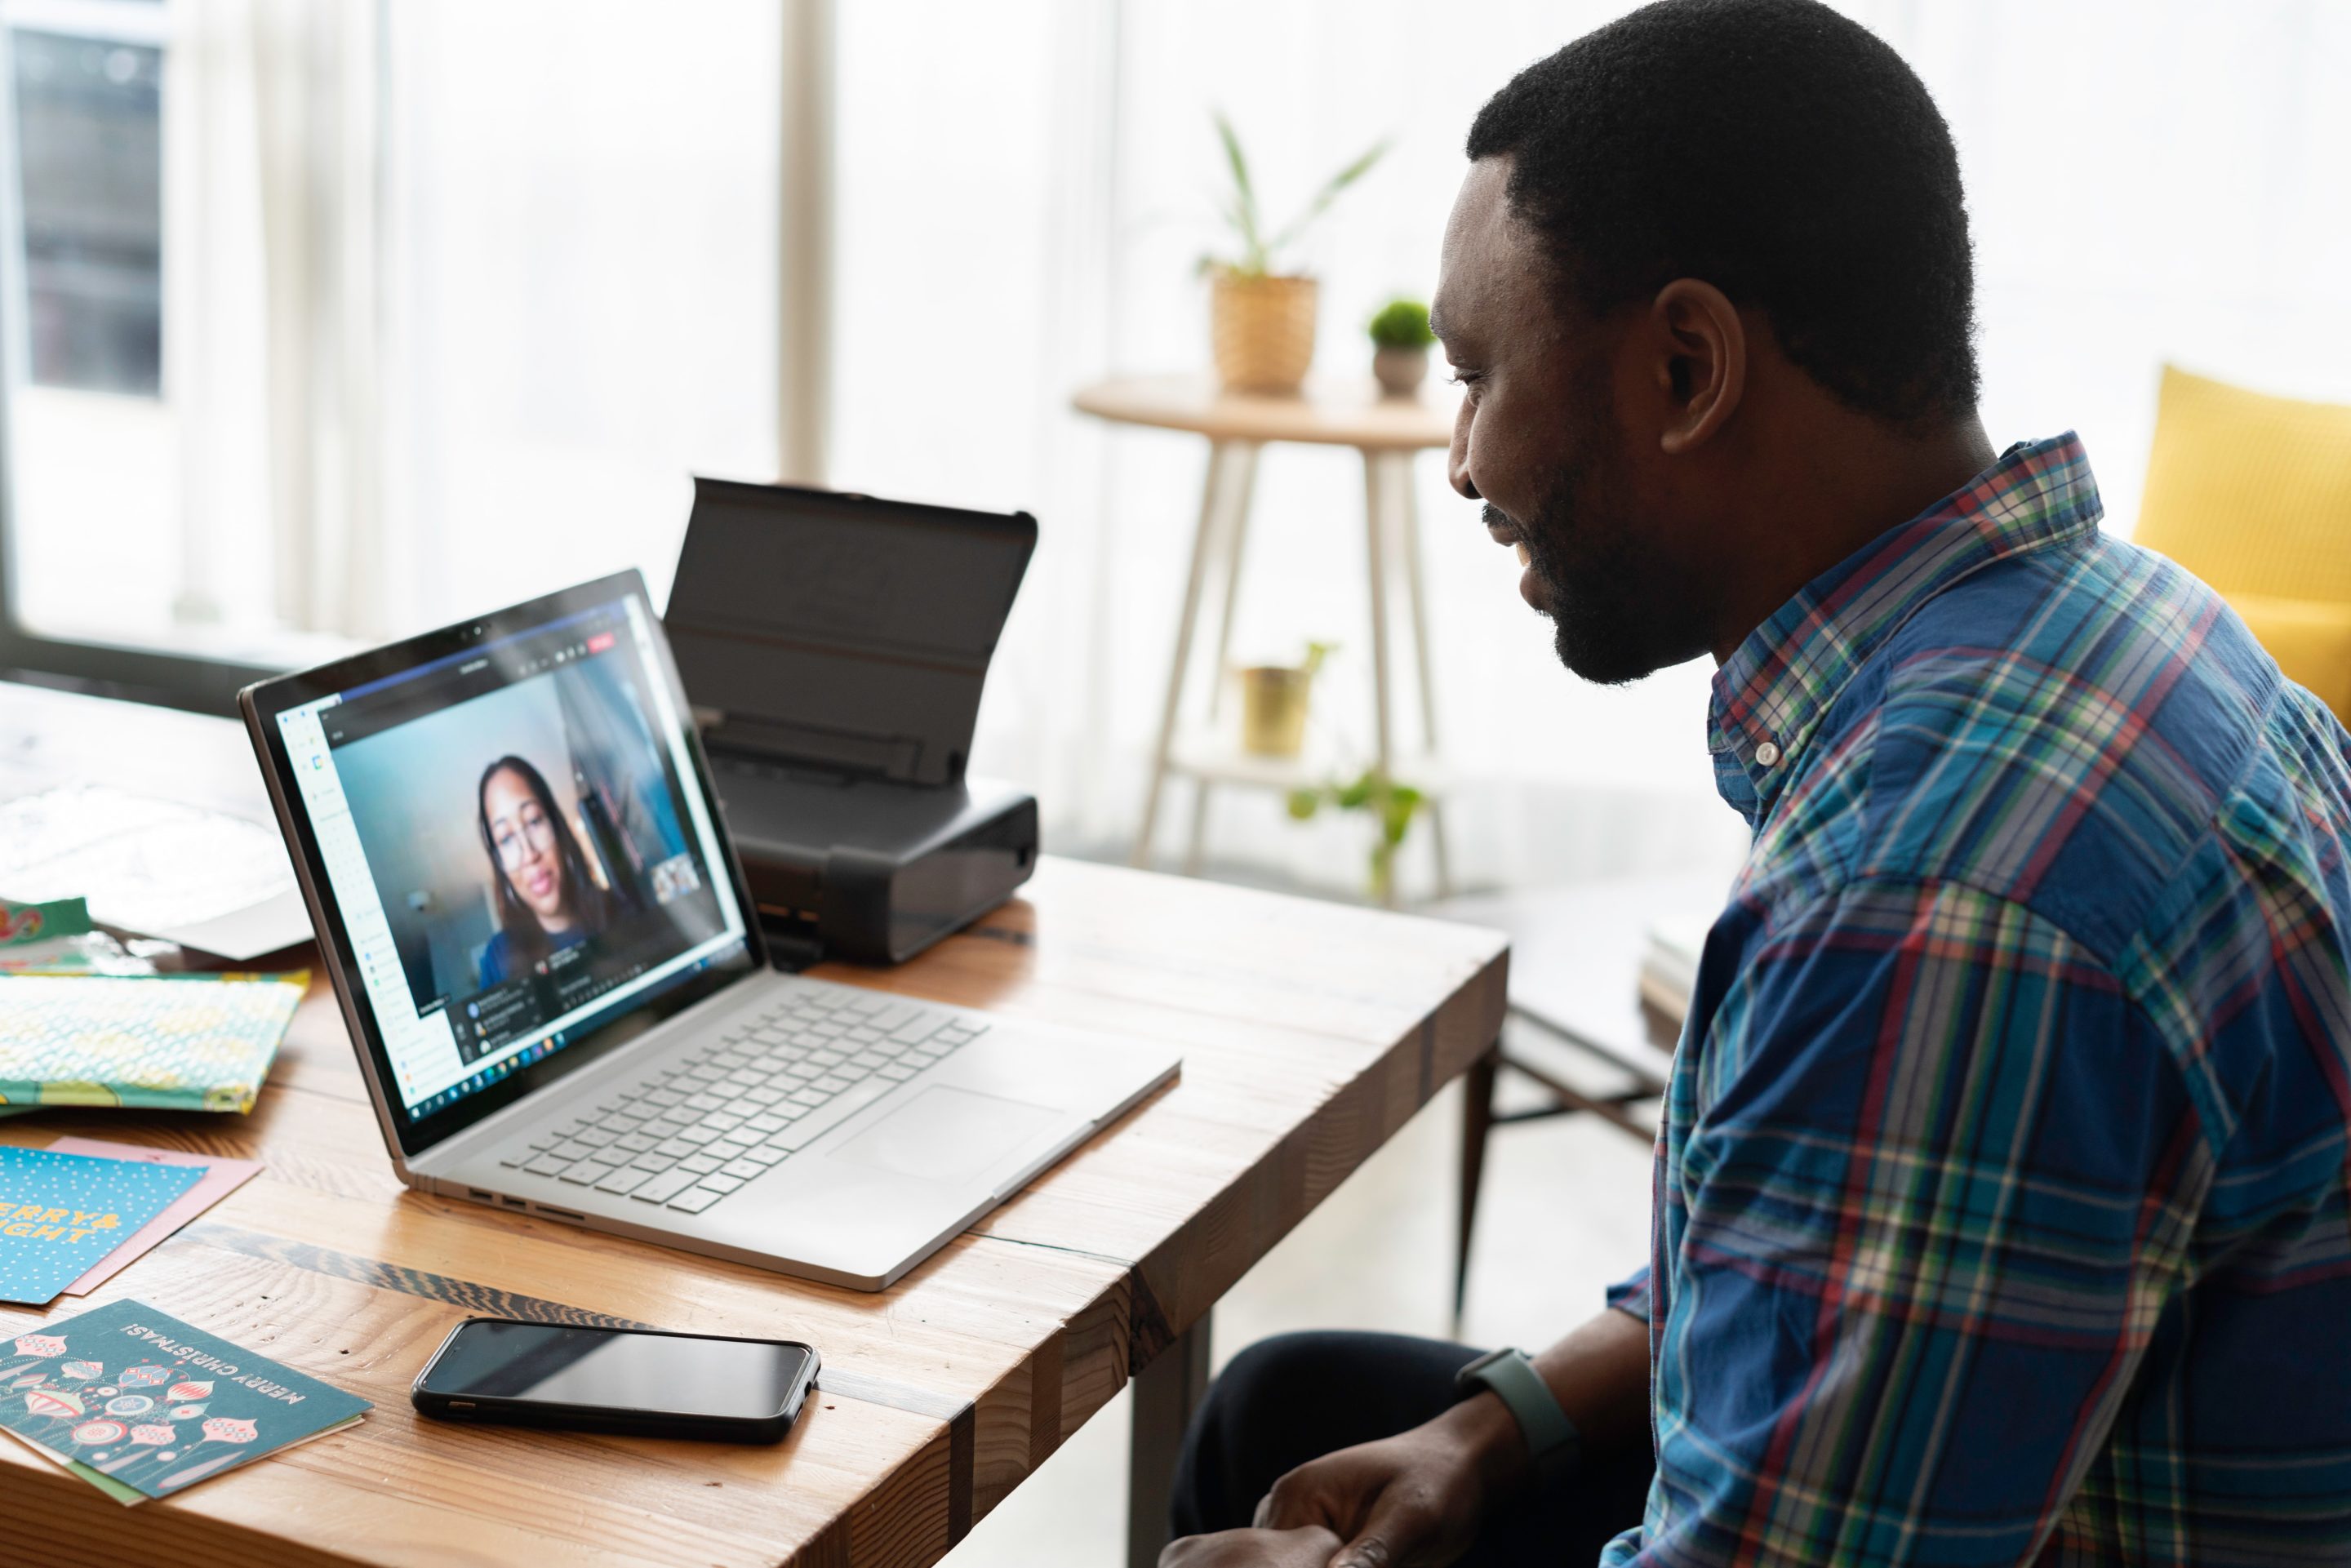 Man sitting on a desk having an online meeting with a woman